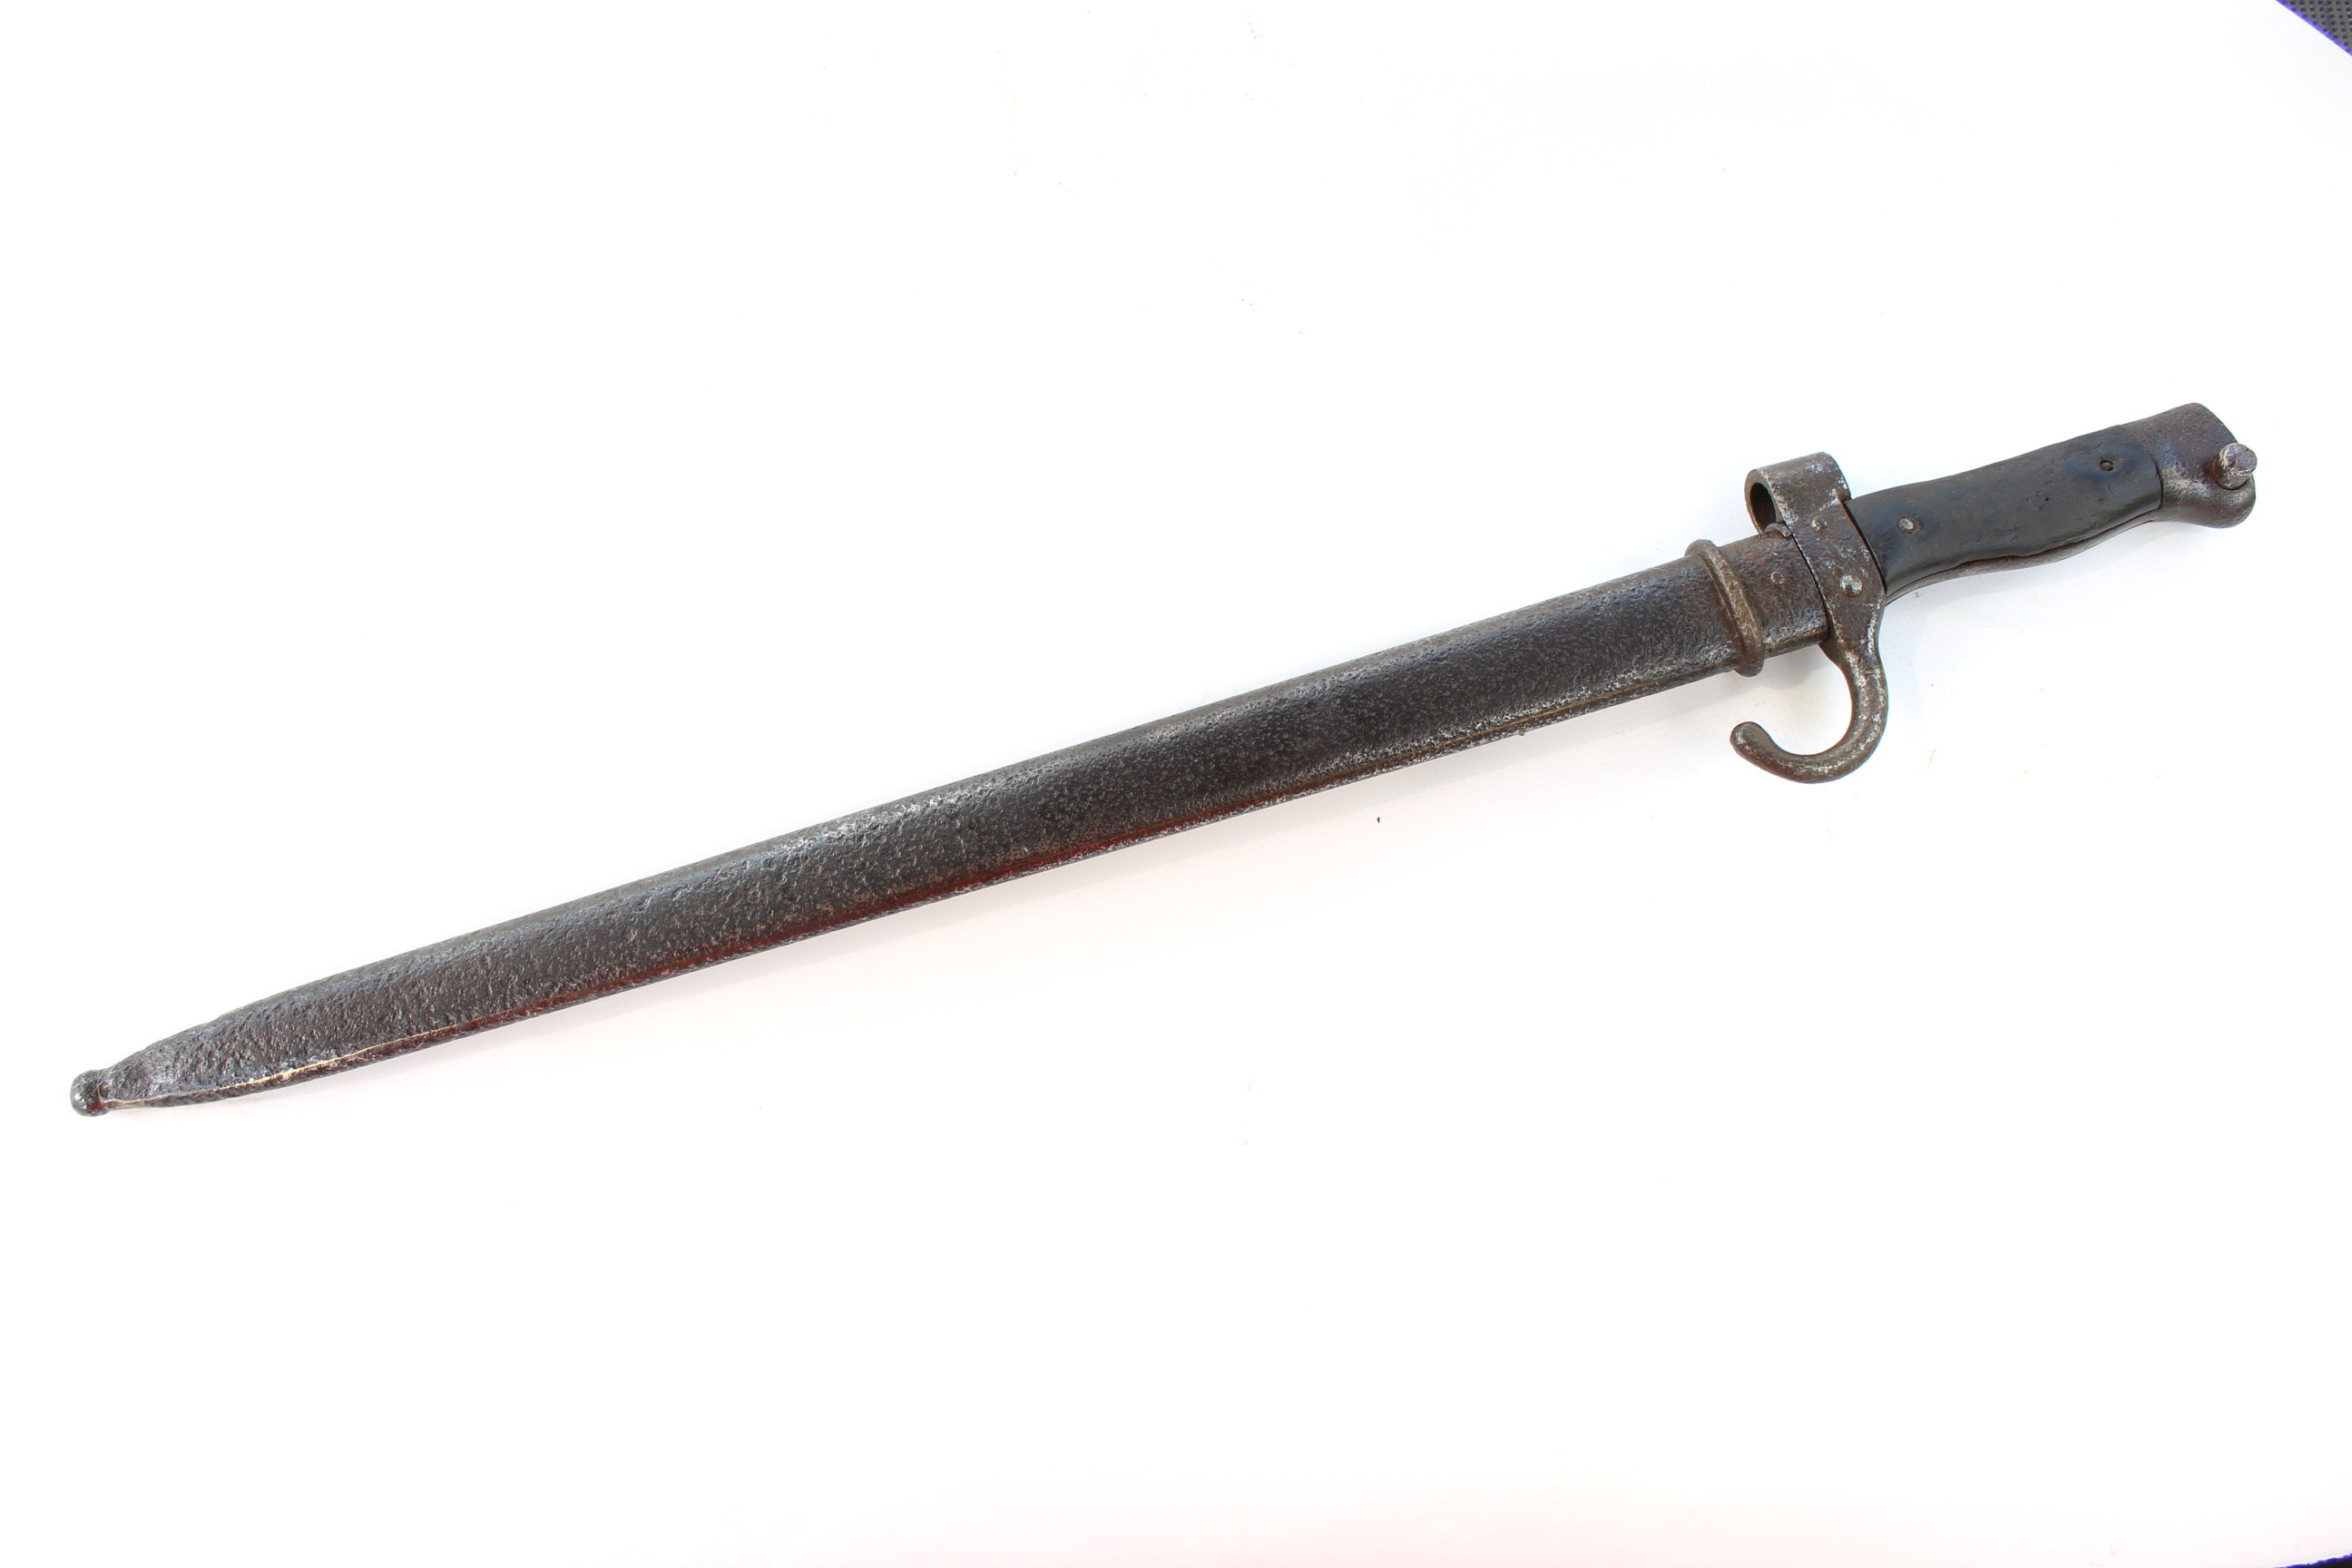 Original French Berthier bayonet pitted from with wear 1892, of model and signs